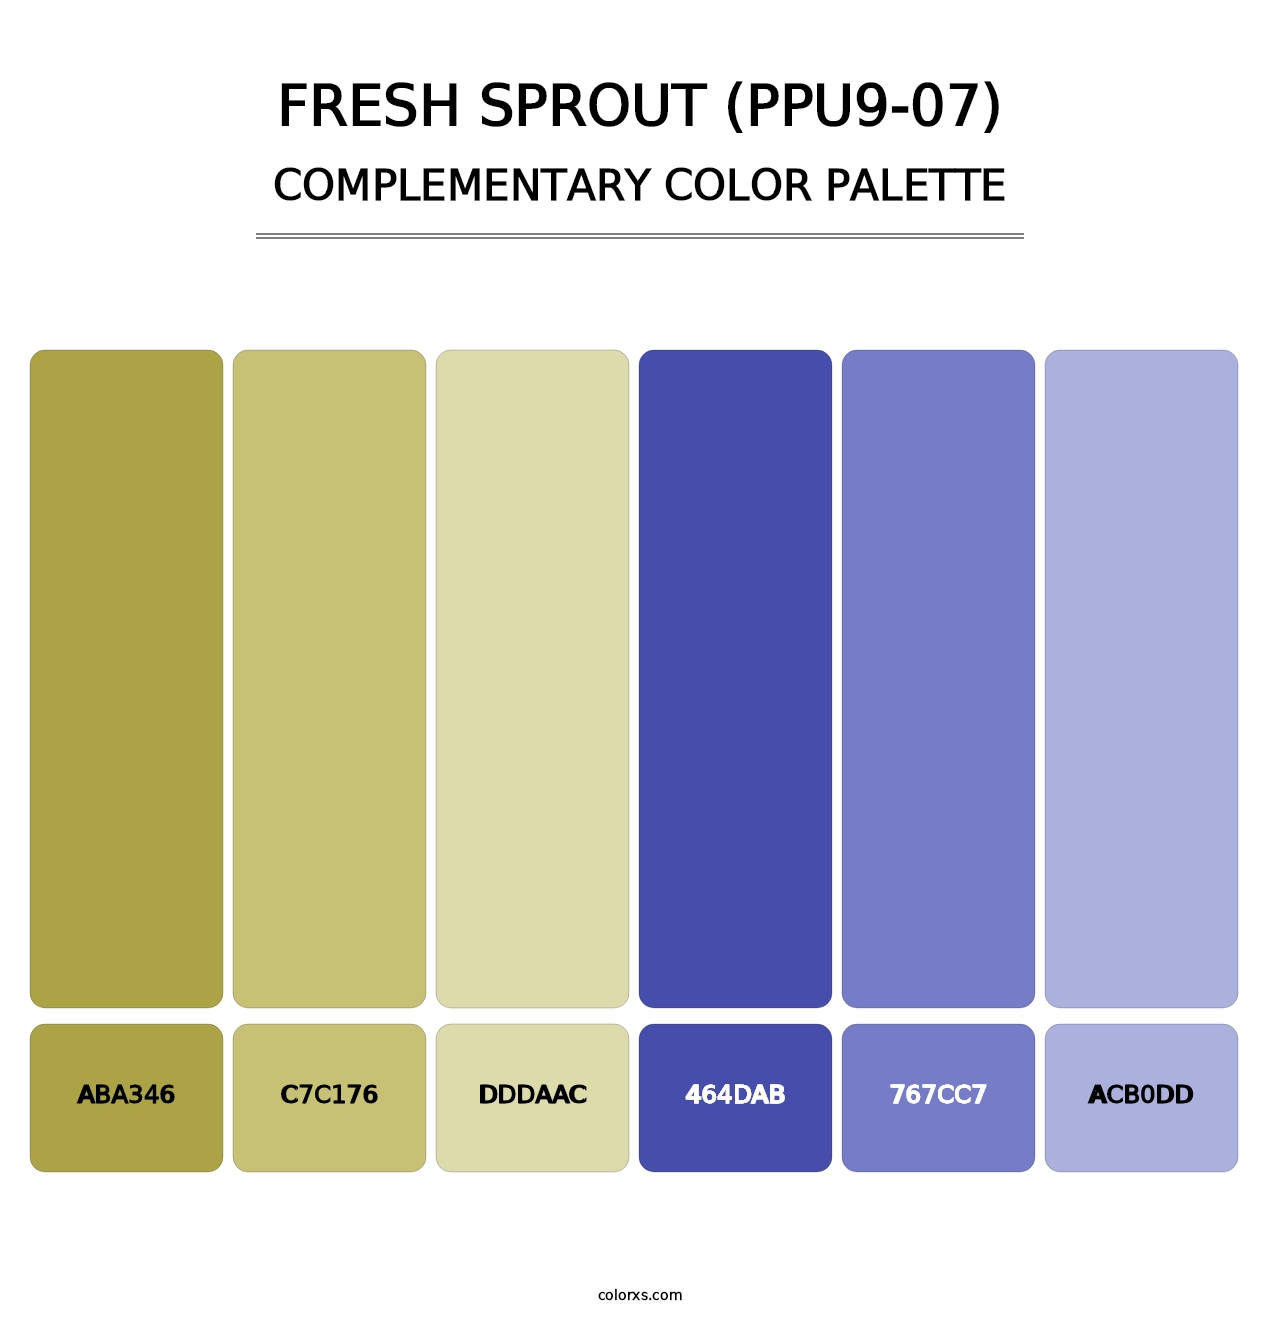 Fresh Sprout (PPU9-07) - Complementary Color Palette